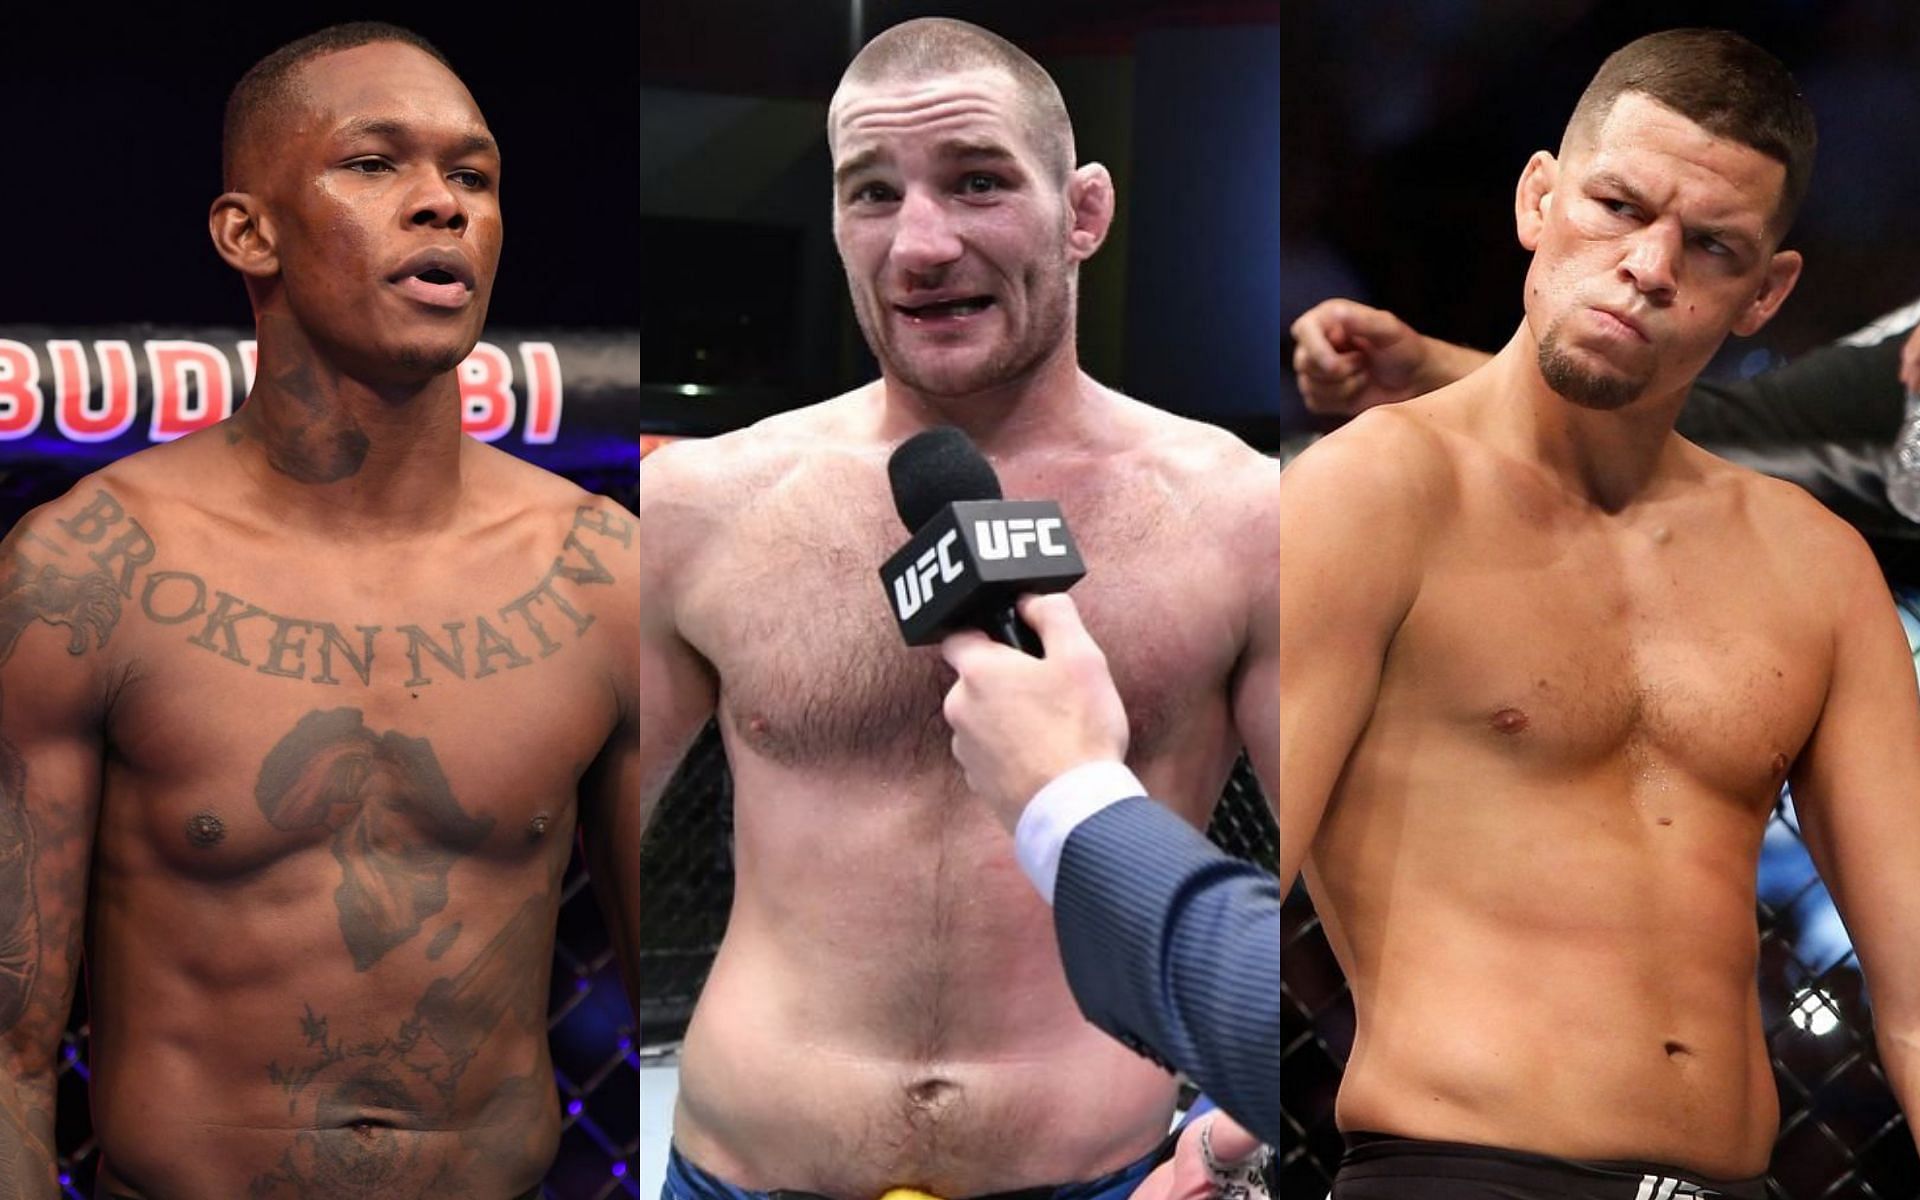 L-R: Israel Adesanya, Sean Strickland, and Nate Diaz [Left-most photo via @MMAFighting on Twitter]